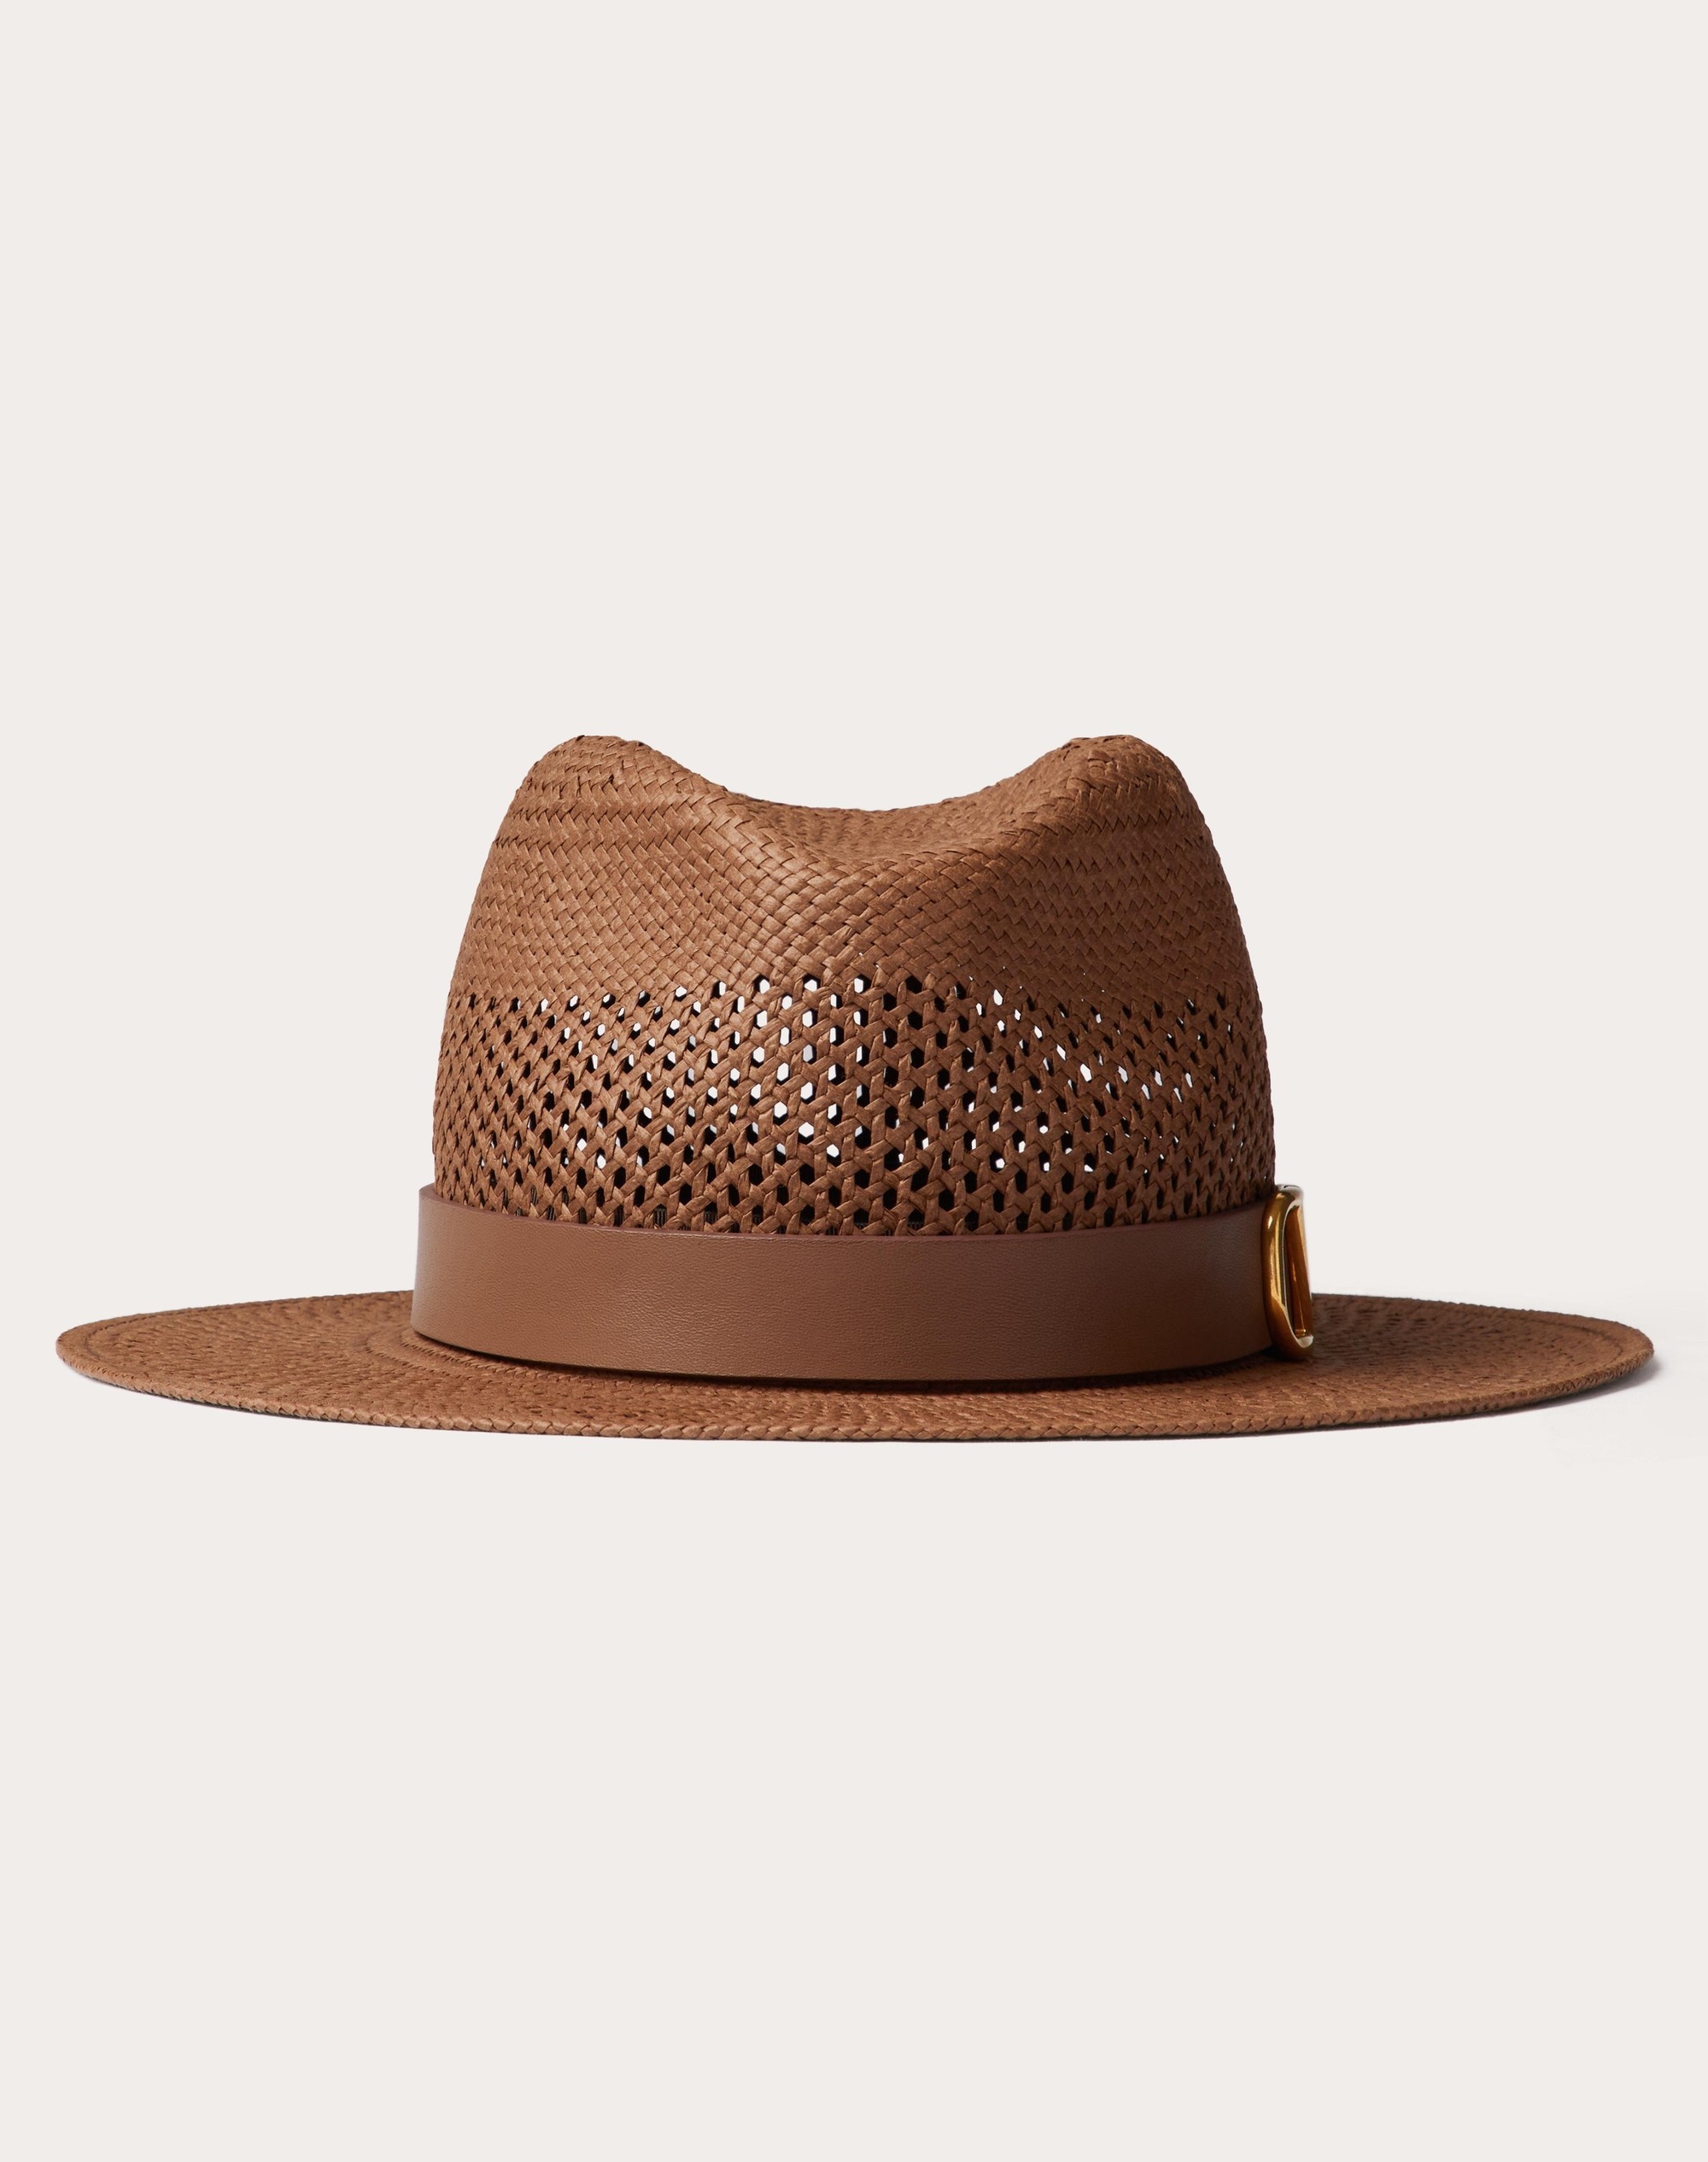 TEXTILE PAPER AND LEATHER VLOGO SIGNATURE FEDORA HAT - 1